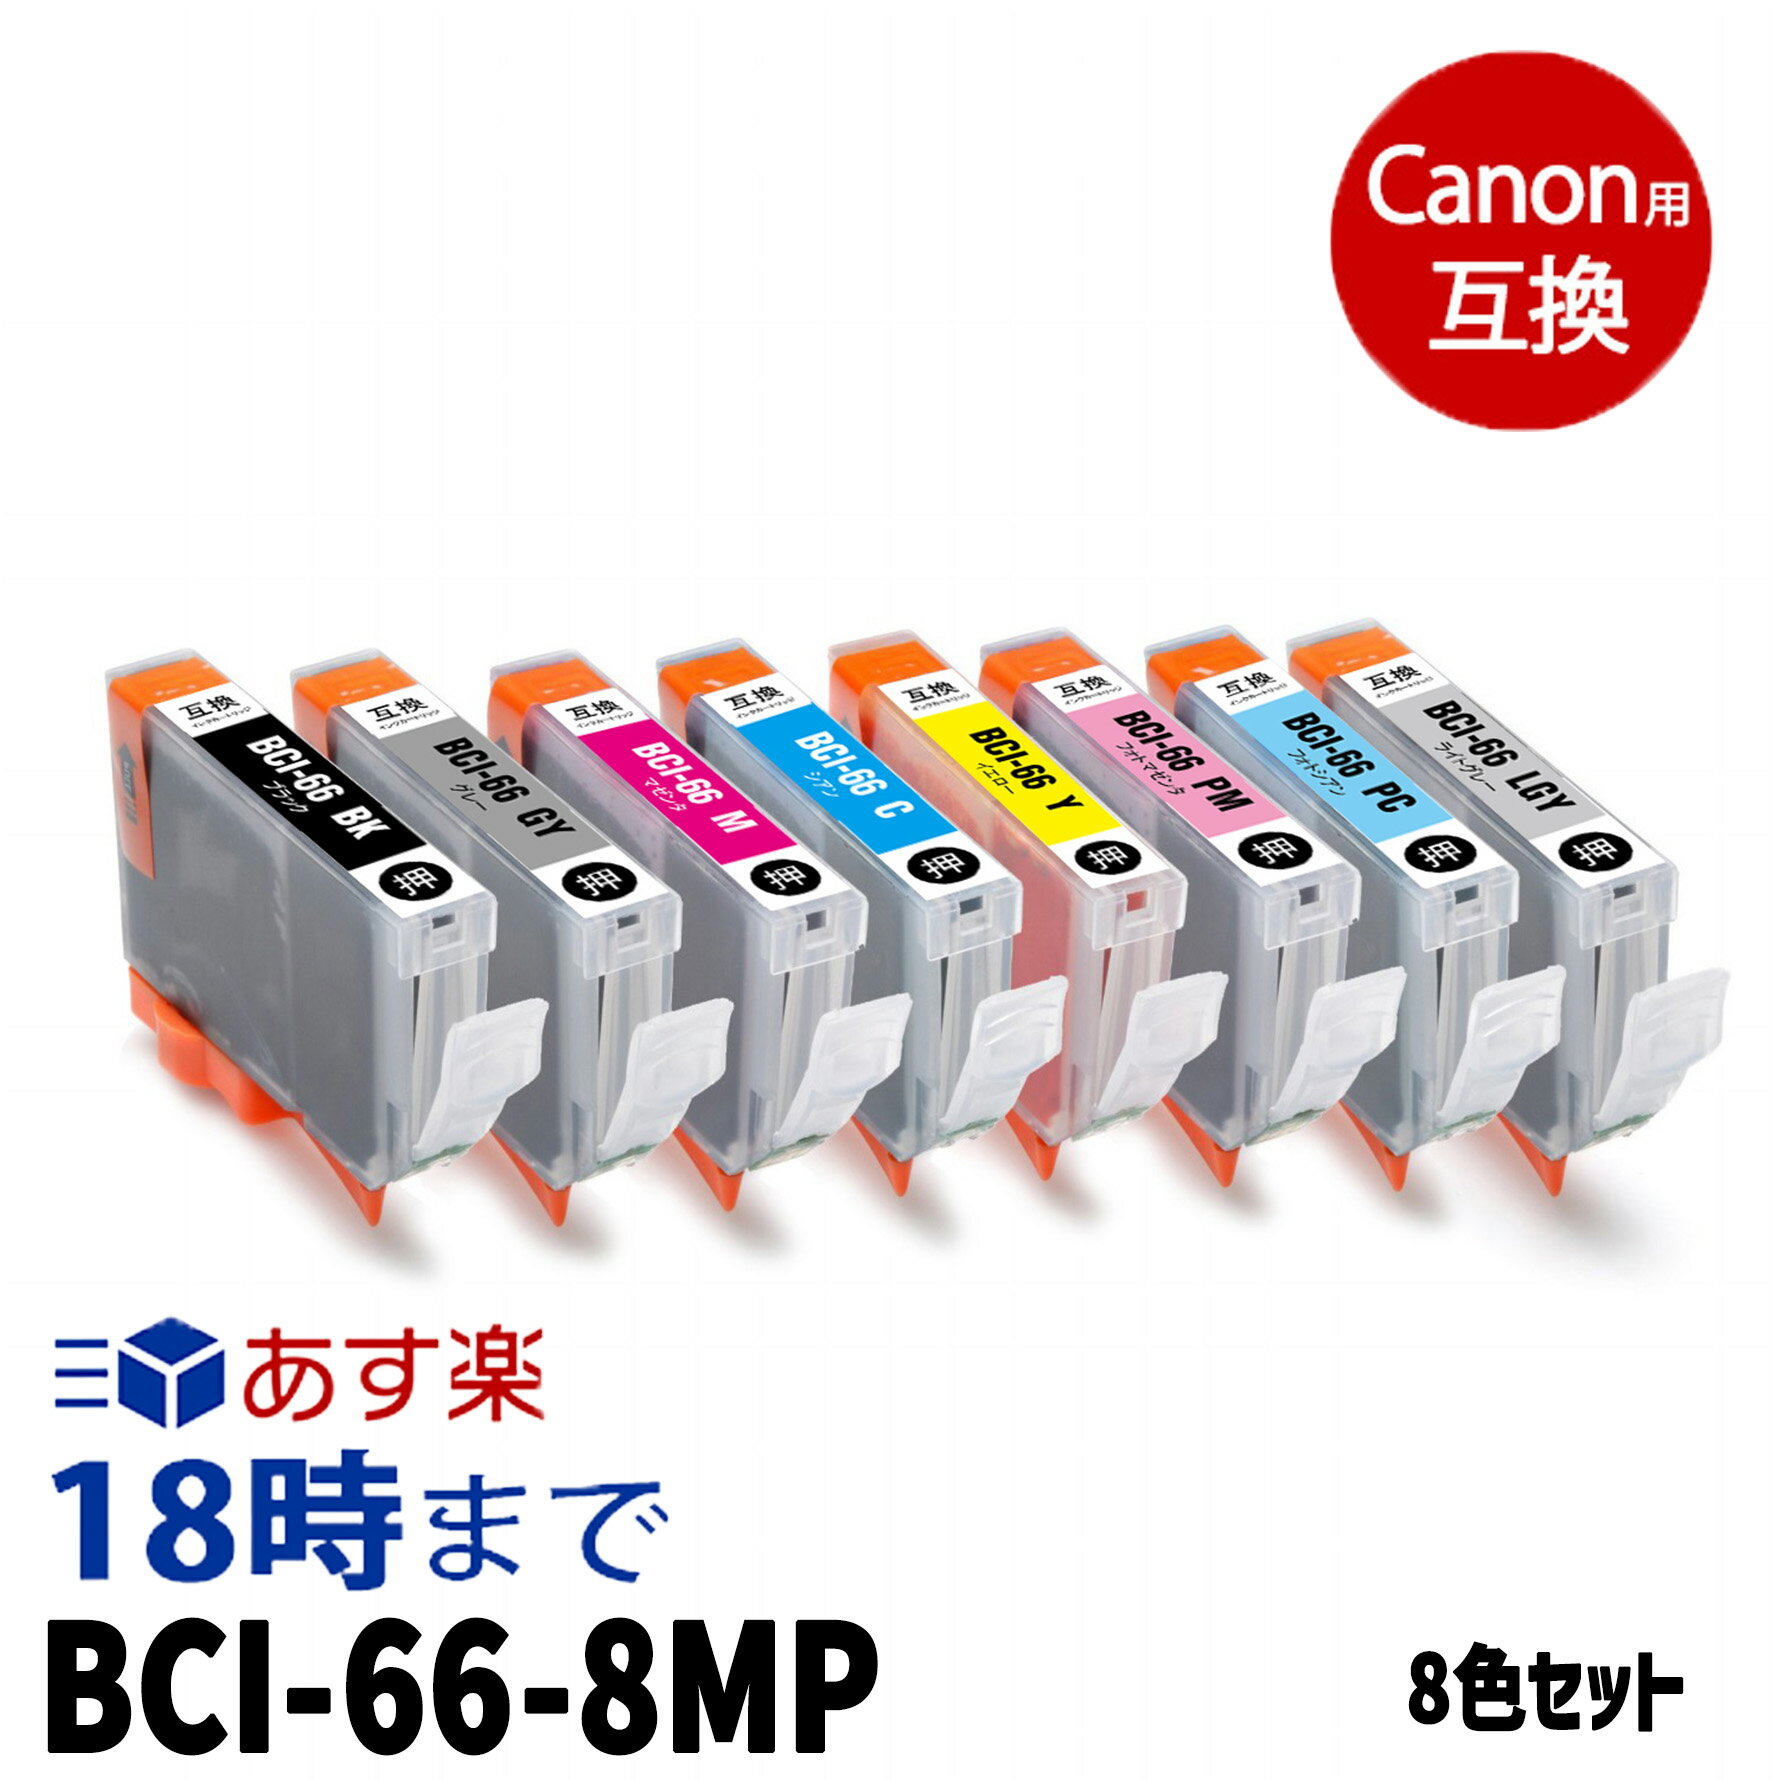 Ψ0.1%̤ۥΥ BCI-66-8MP 8å Υ ߴ :BCI-66BK BCI-66C BCI-66M BCI-66Y BCI-66GY BCI-66PC BCI-66PM BCI-66LGY :PIXUS-PRO-S1 ڥ󥯳̿